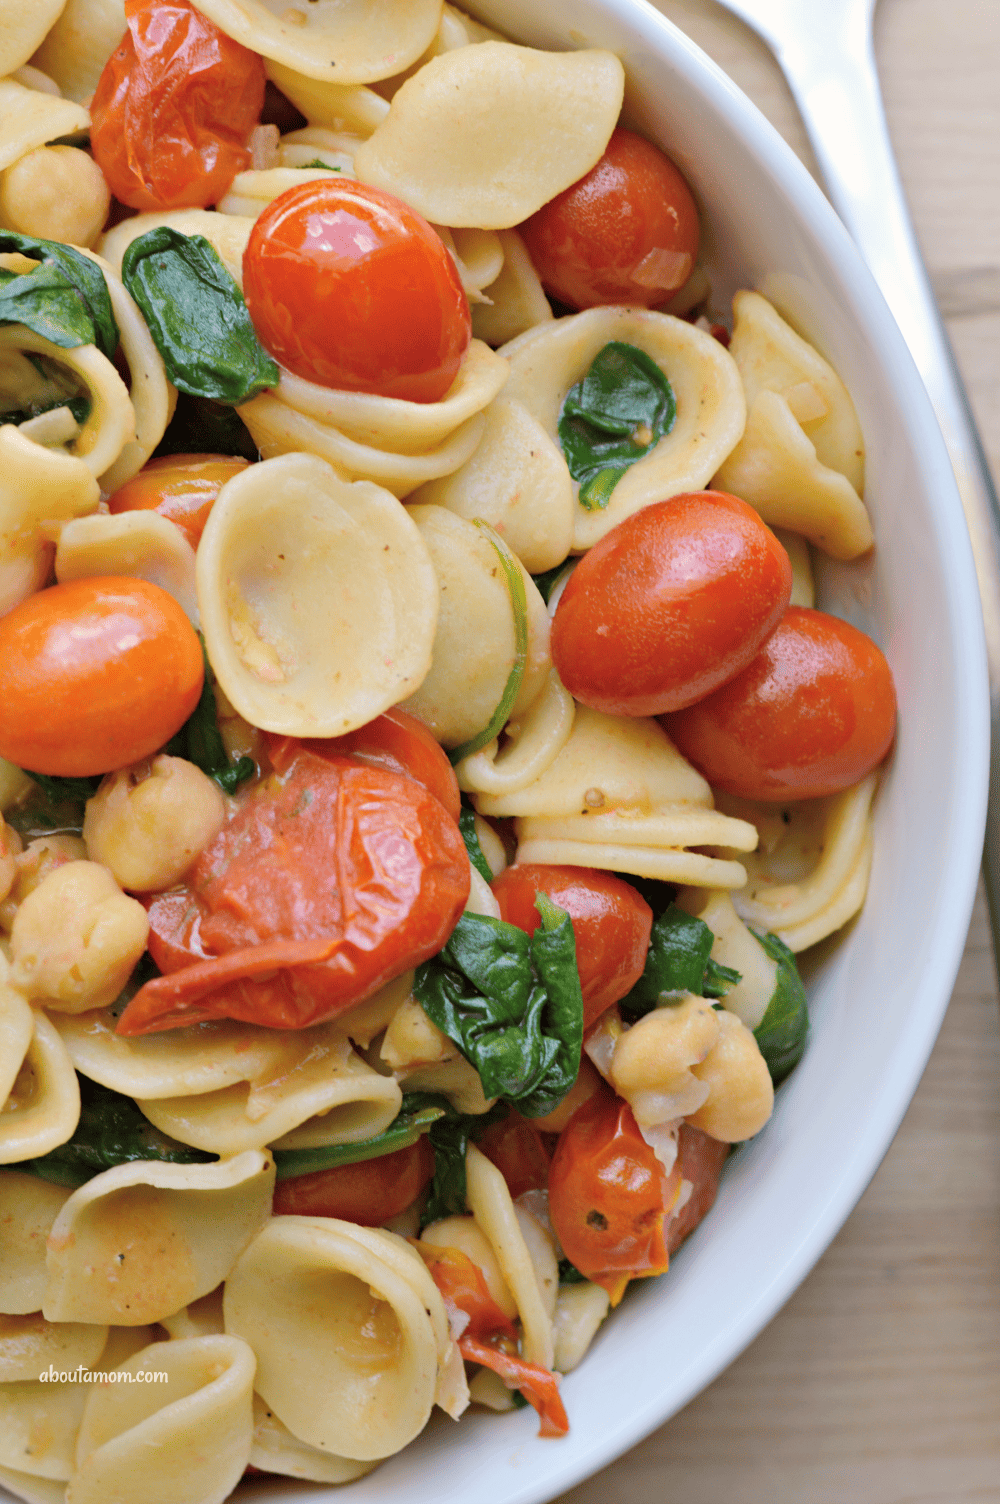 A delicious and easy-to-prepare orecchiette pasta recipe. Orecchiette pasta with sauteed tomatoes, spinach and white beans is a simple yet flavorful dish inspired by my travels across Italy last summer.